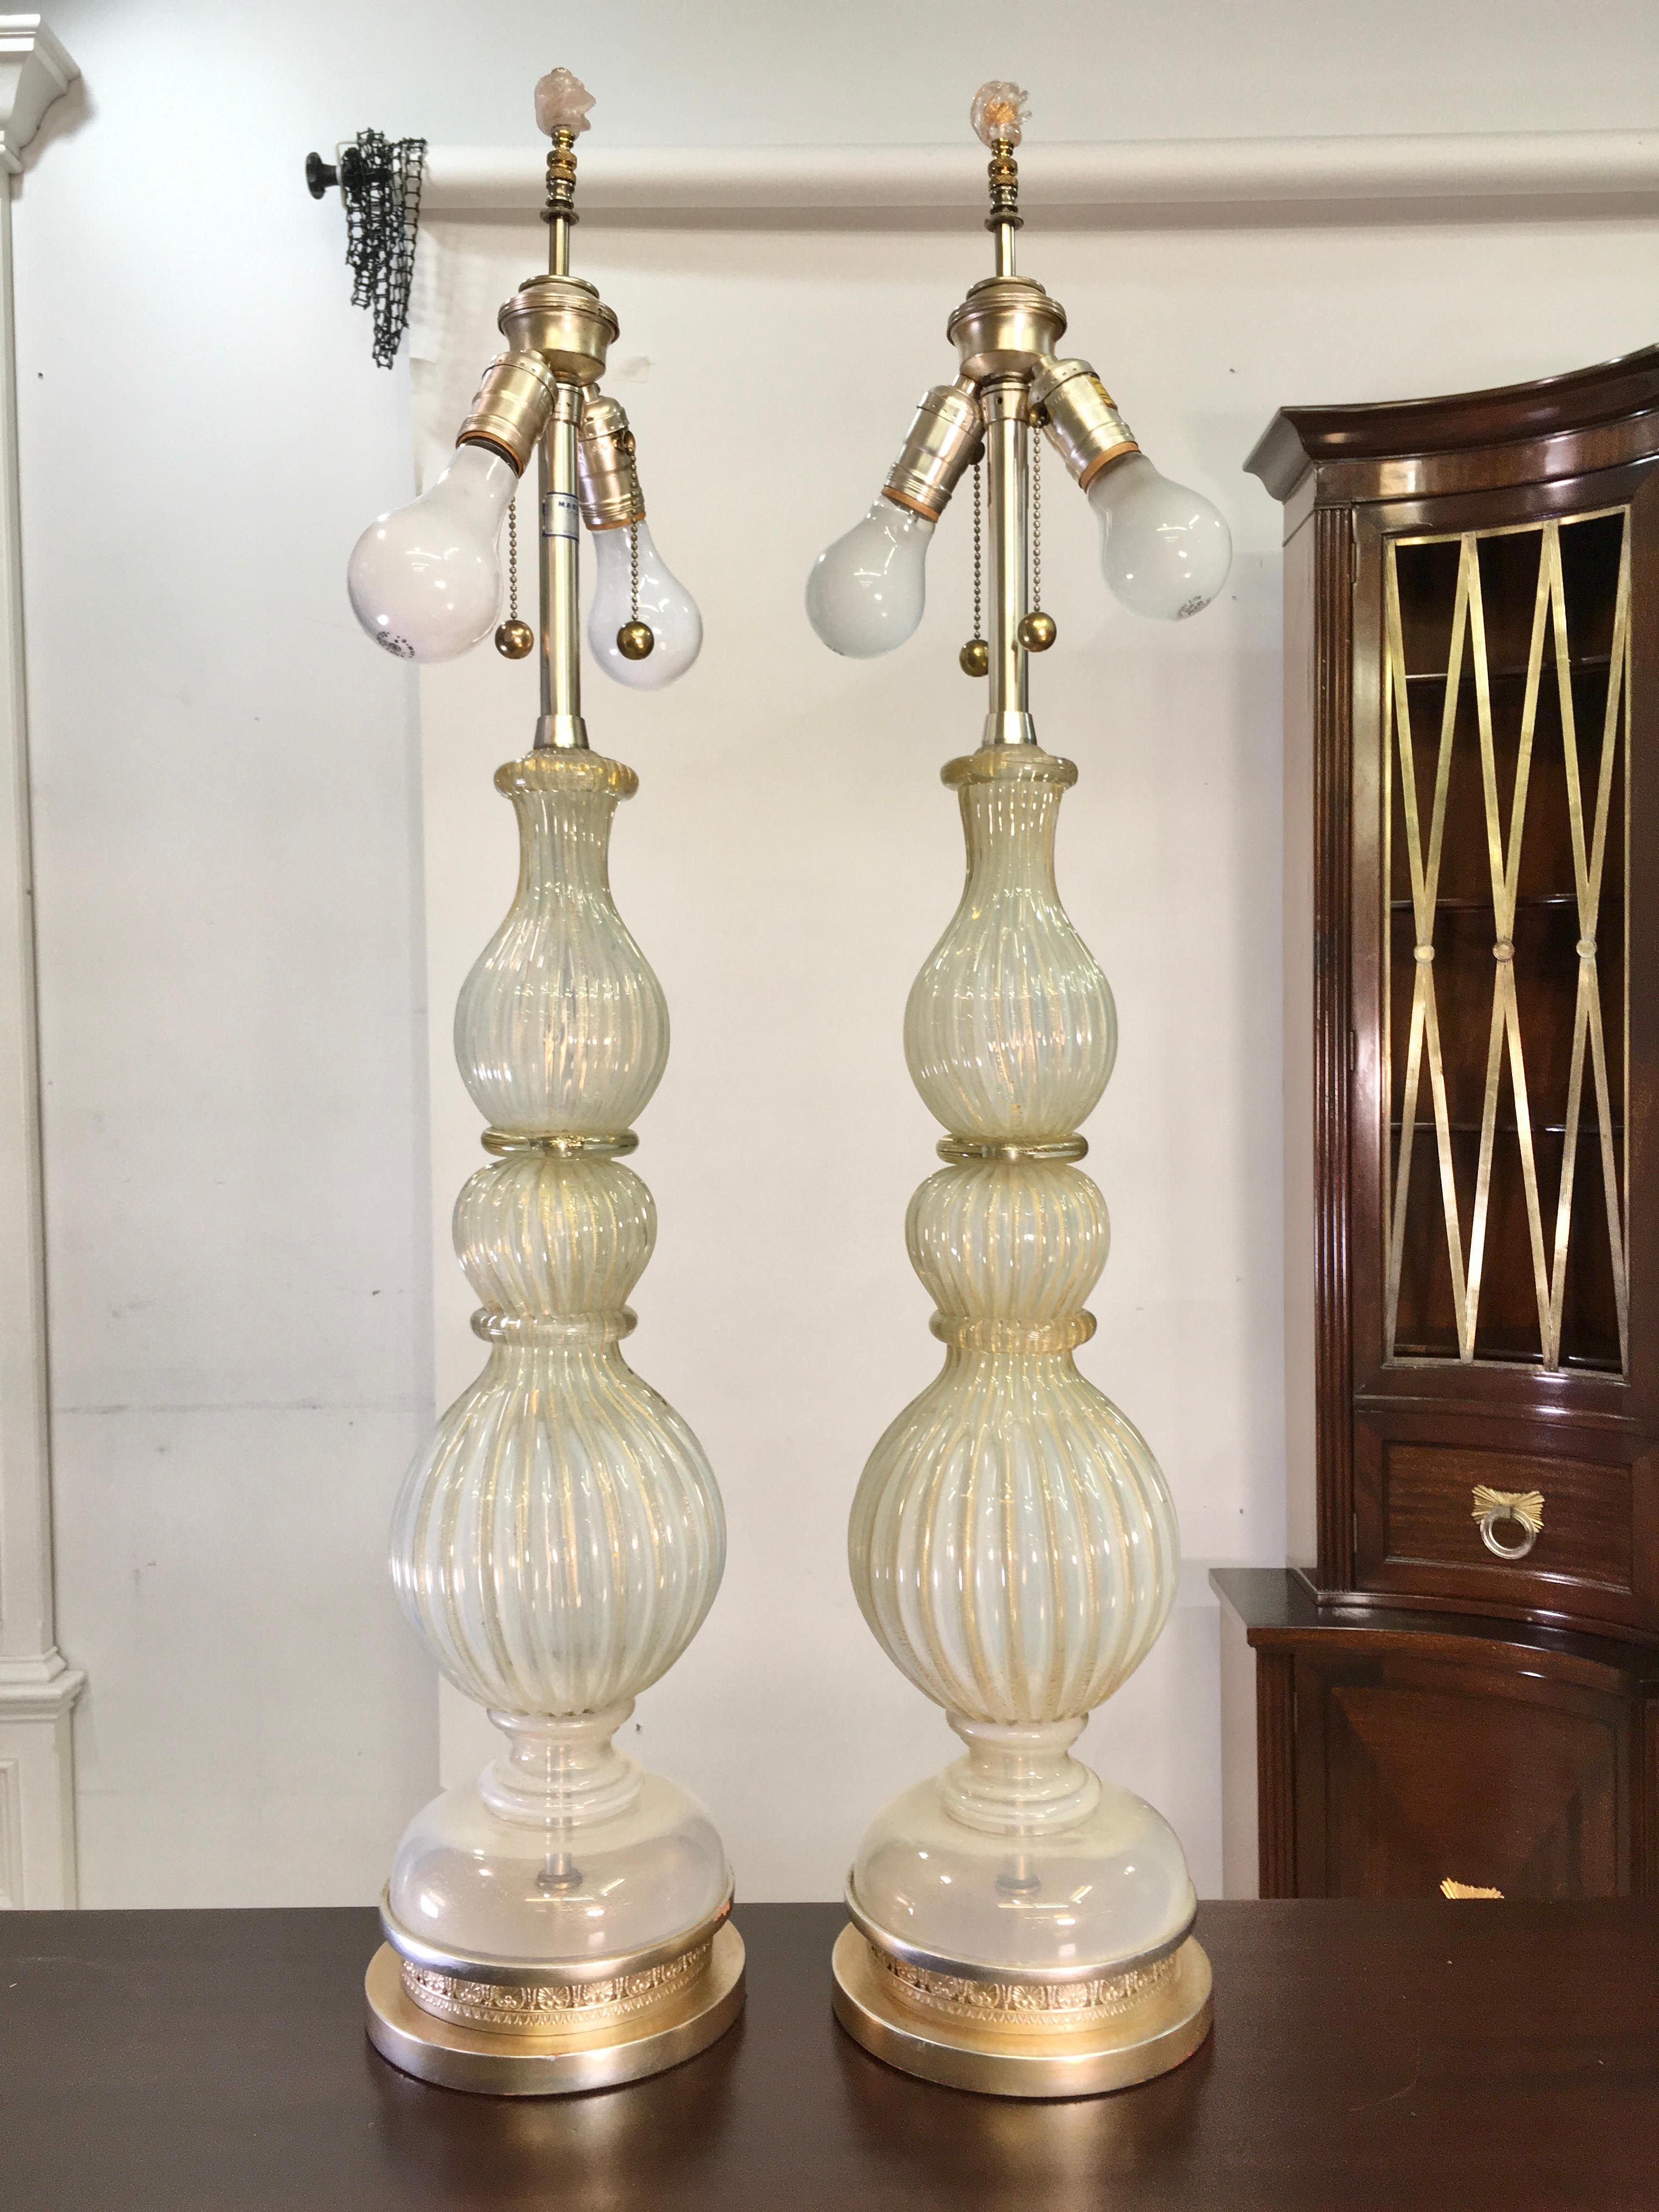 Pair of Seguso Murano Lamps by Marbro In Good Condition For Sale In Hanover, MA